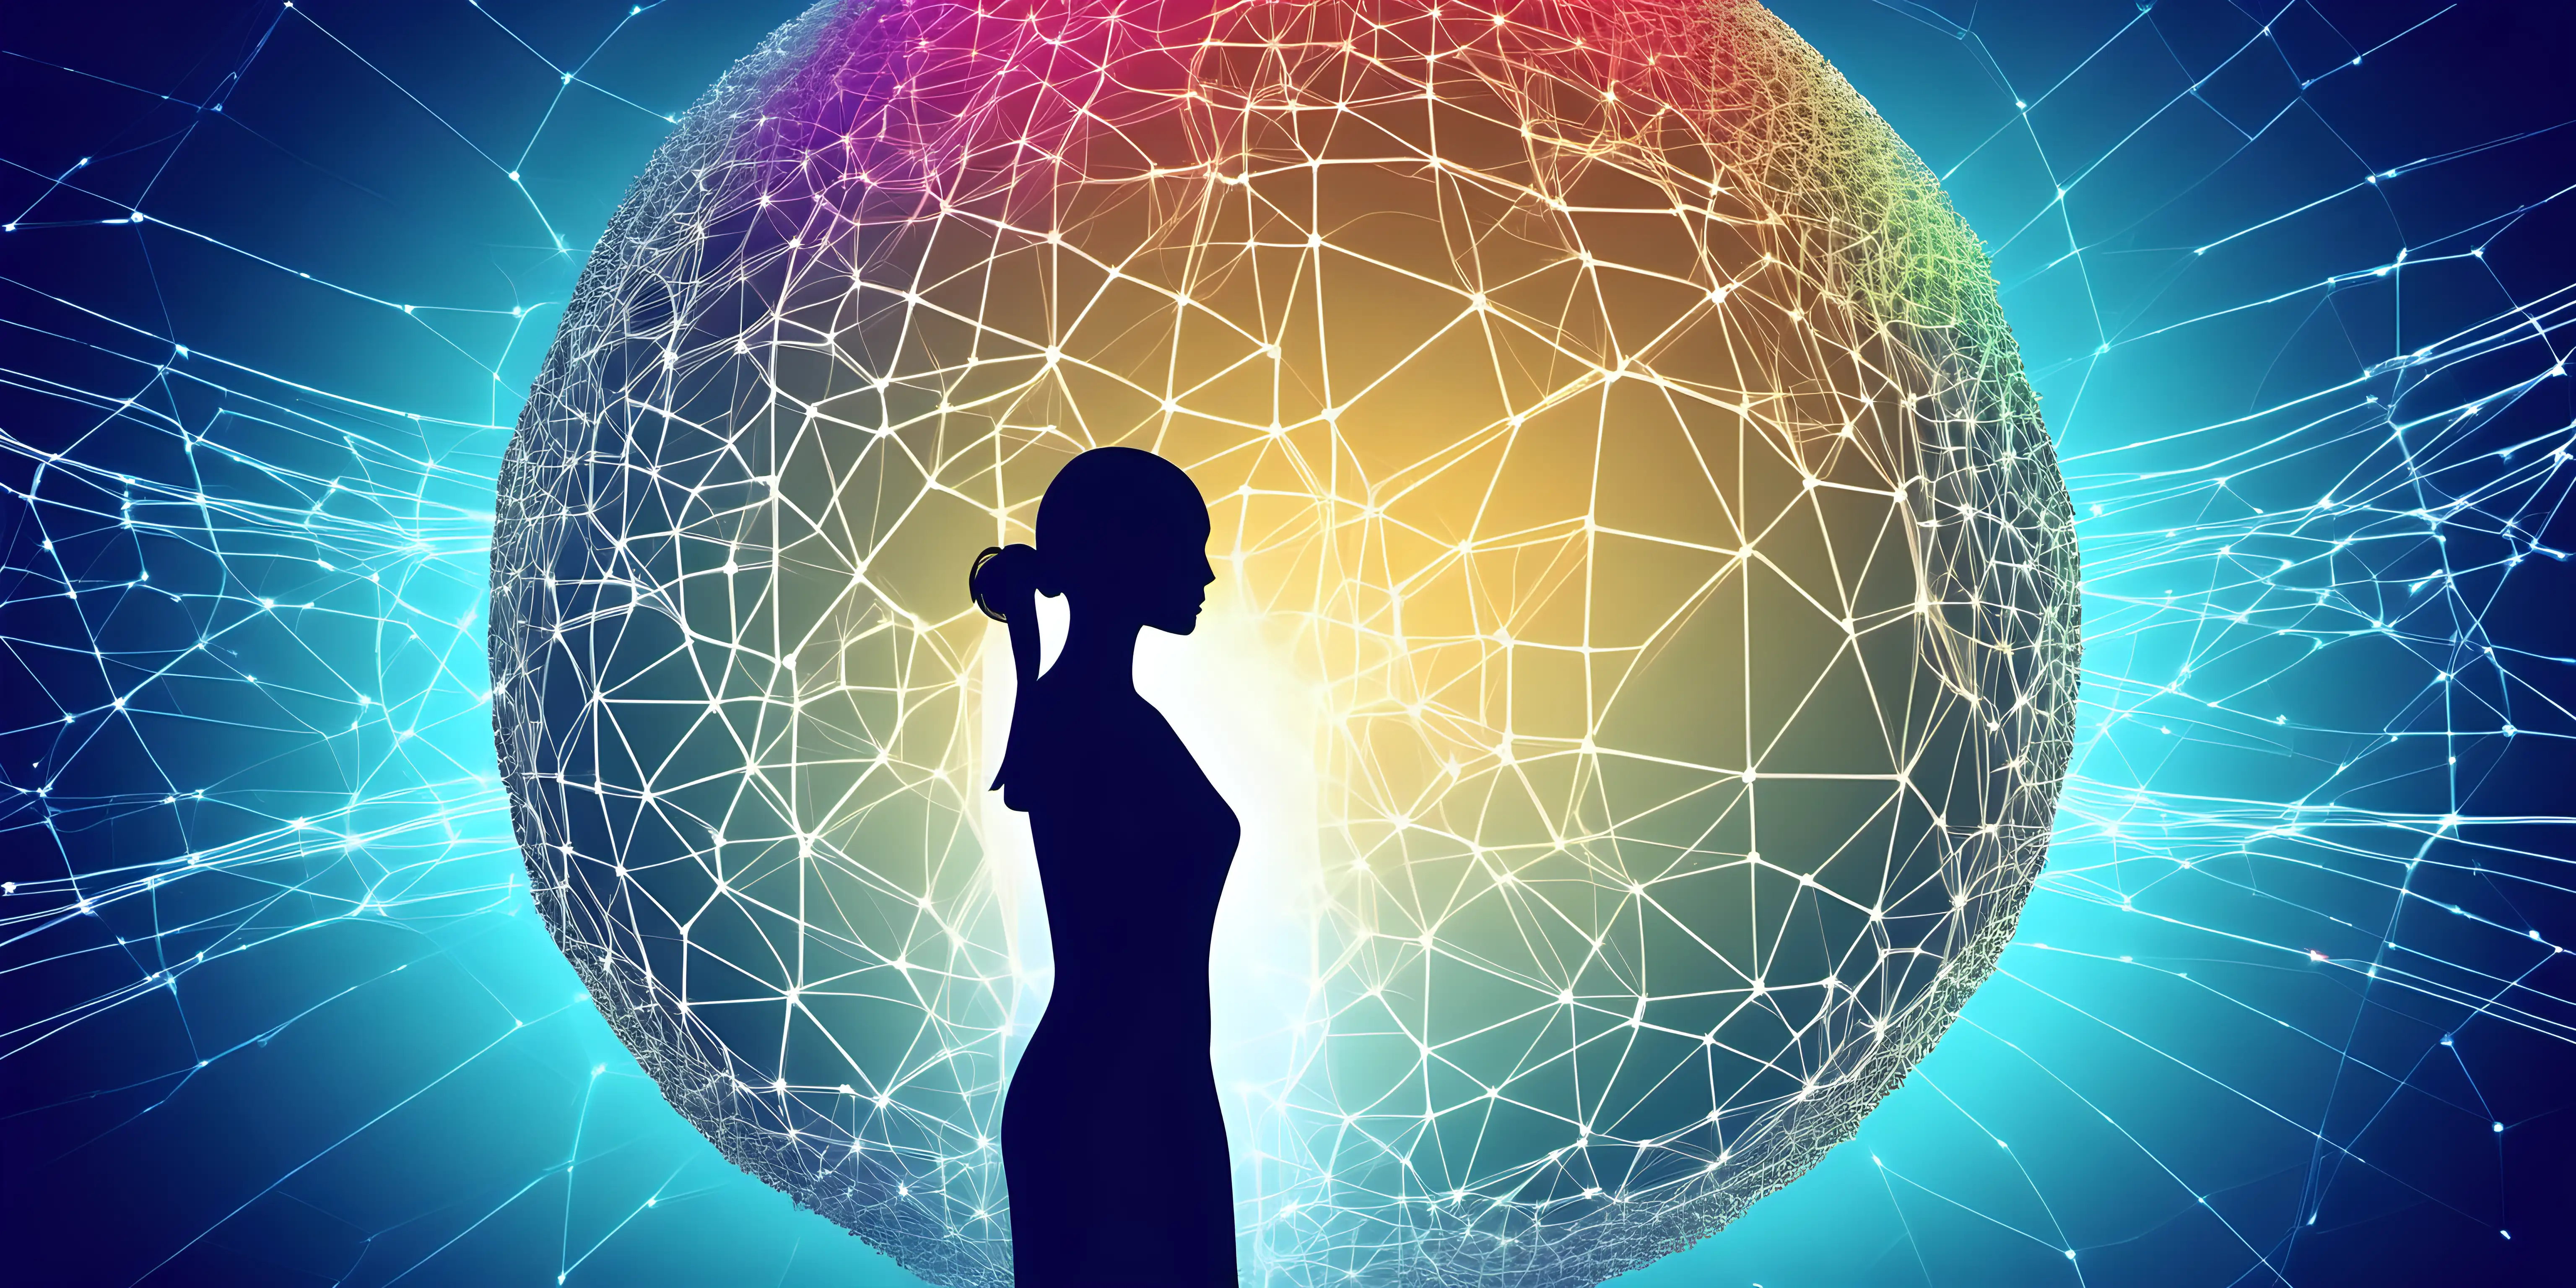 stylized large artificial intelligence neural network with colorful nodes in front of a silhouette of high-tech blue globe. A  small  silhouette of mom dressed in short colorful dress  on blue high-tech background.